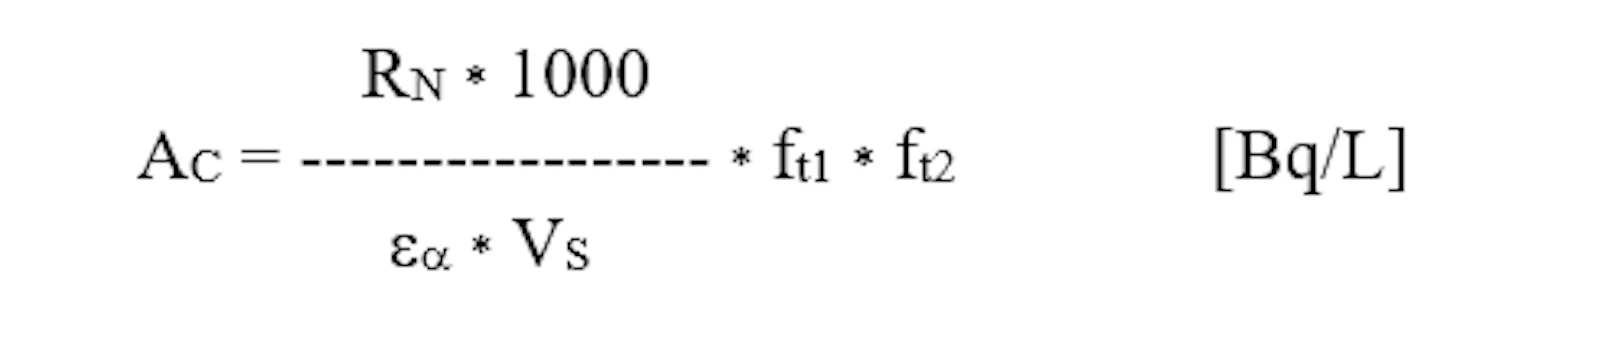 Formula for calculating the activity concentration AC of 226Ra.